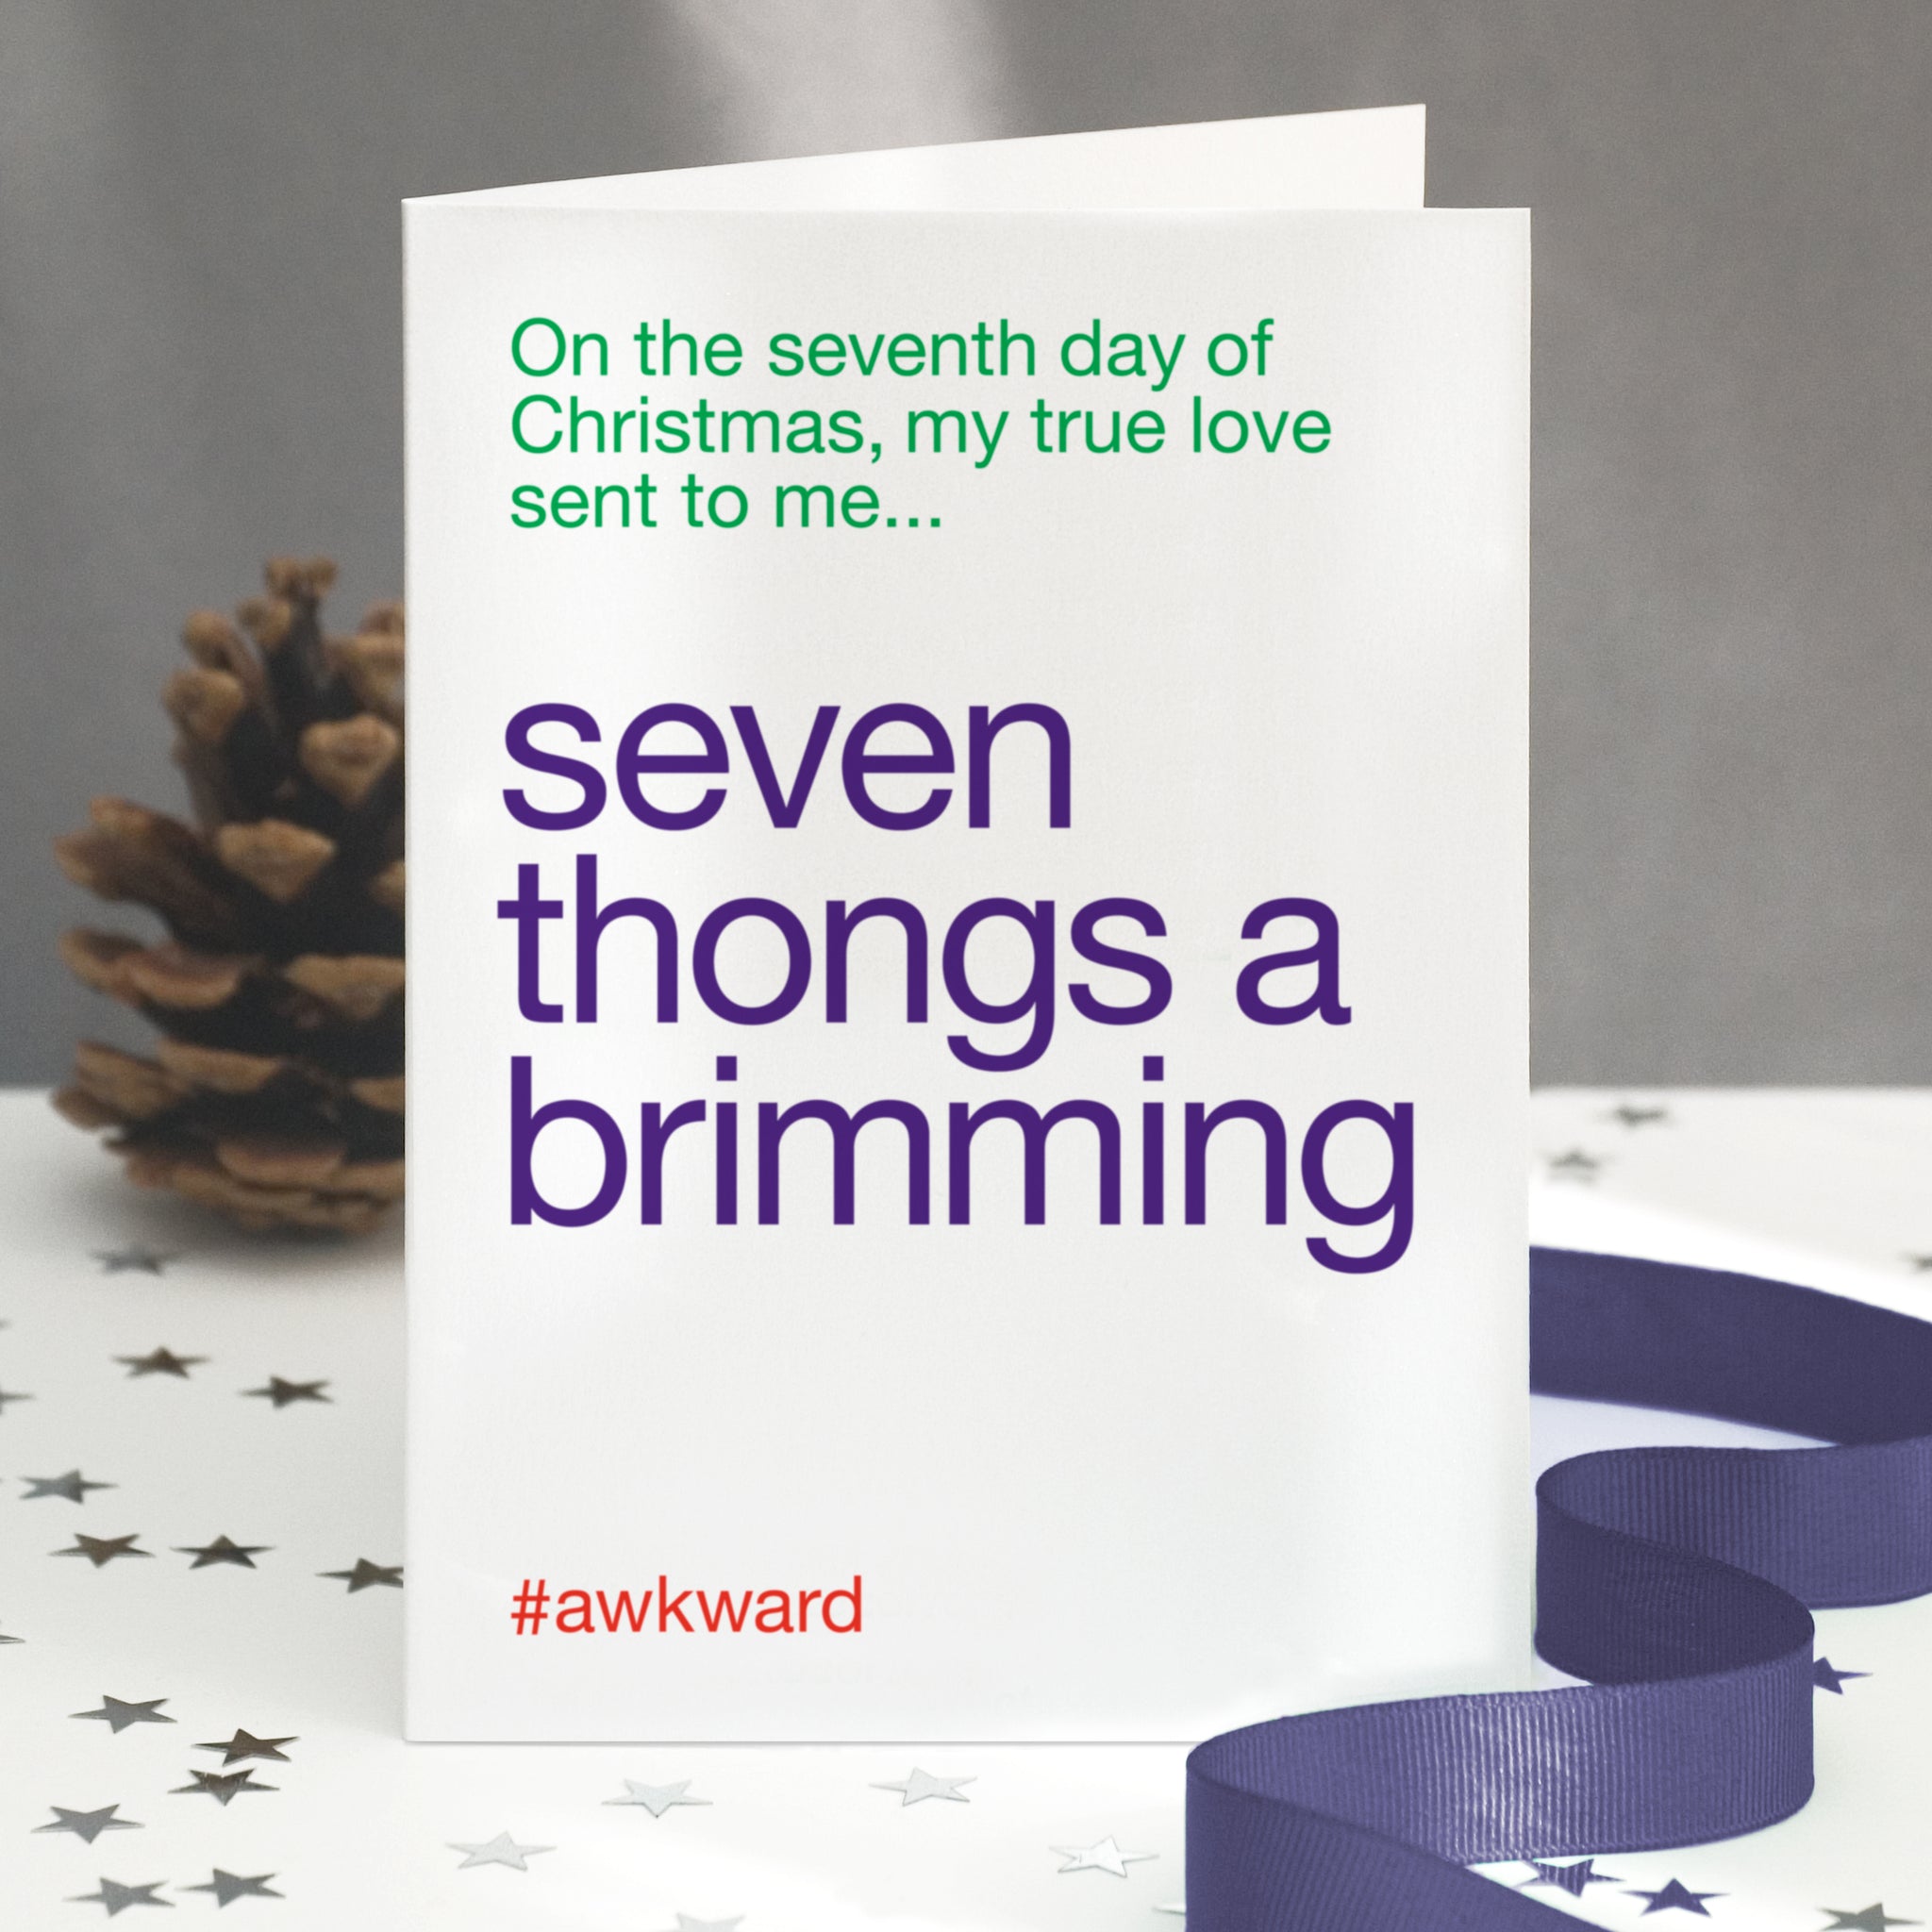 A funny christmas card with the twelve days of christmas lyric altered to 'seven thongs a brimming'.